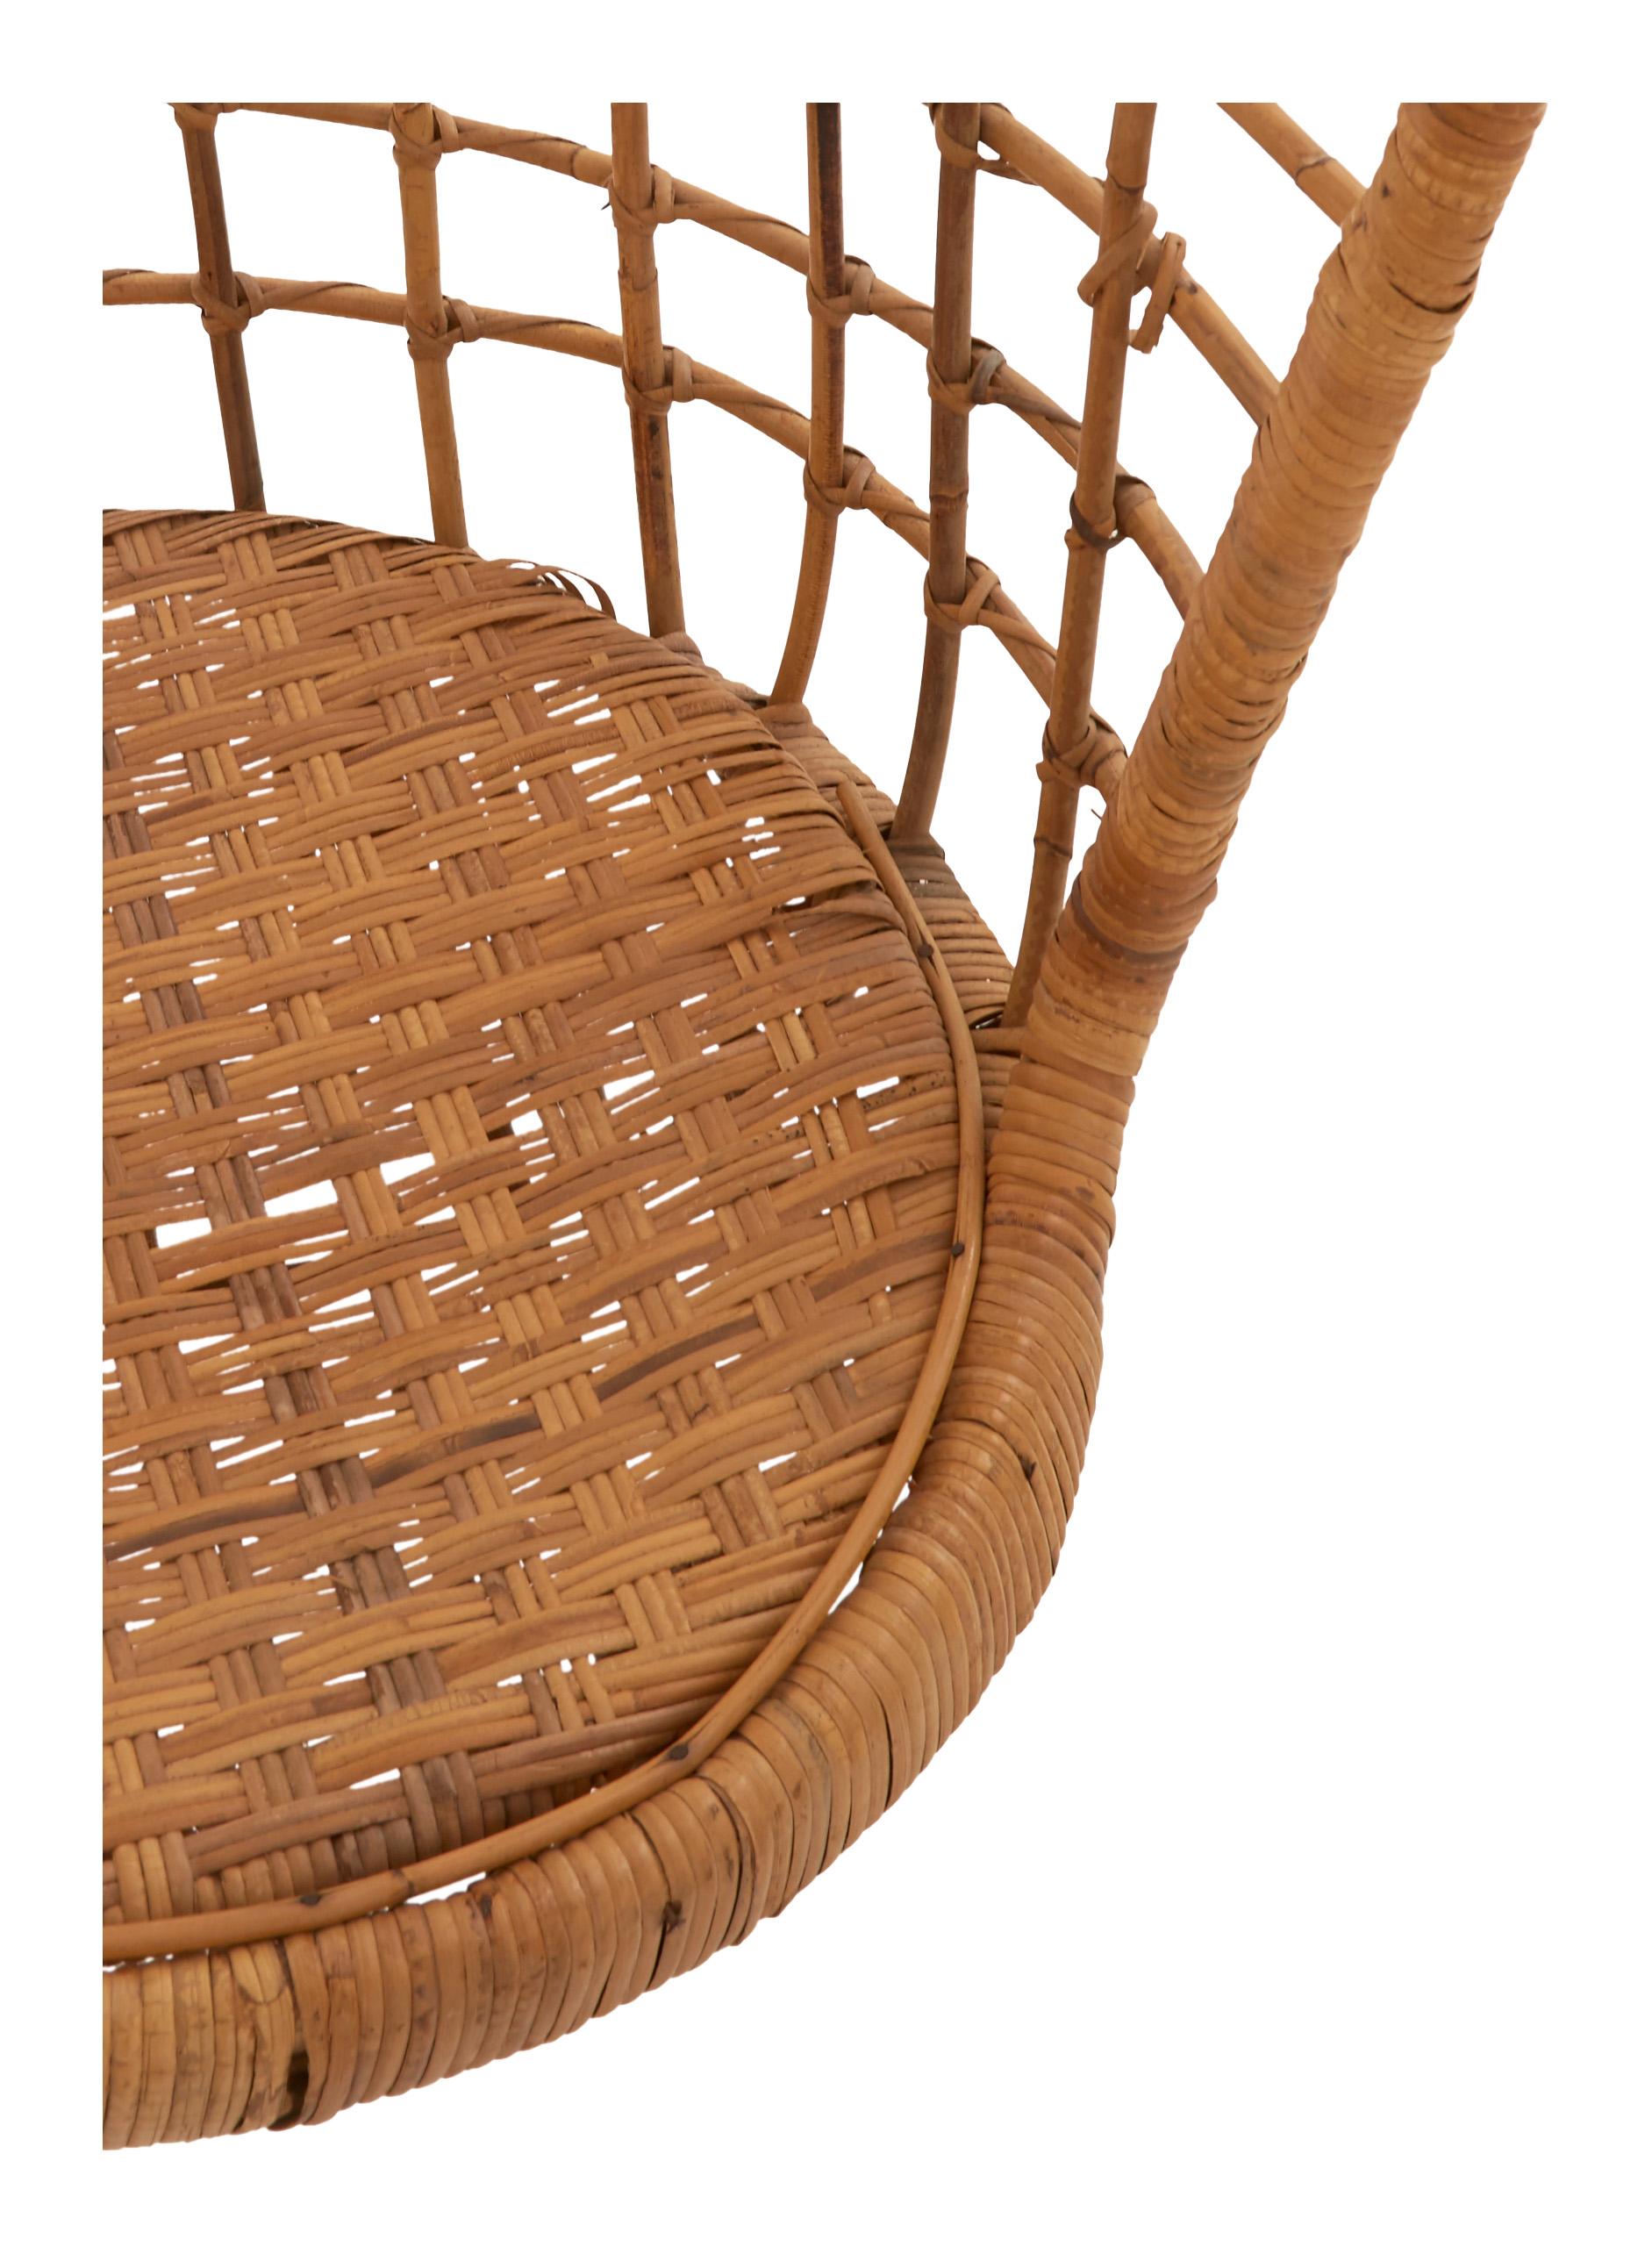 •Weathered bamboo and rattan
•Can be used indoors or outdoors
•Some signs of wear and patina, consistent with age and use
•Professional installation recommended
•Does not include hook or chain
•Mid-20th century
•American
•circa